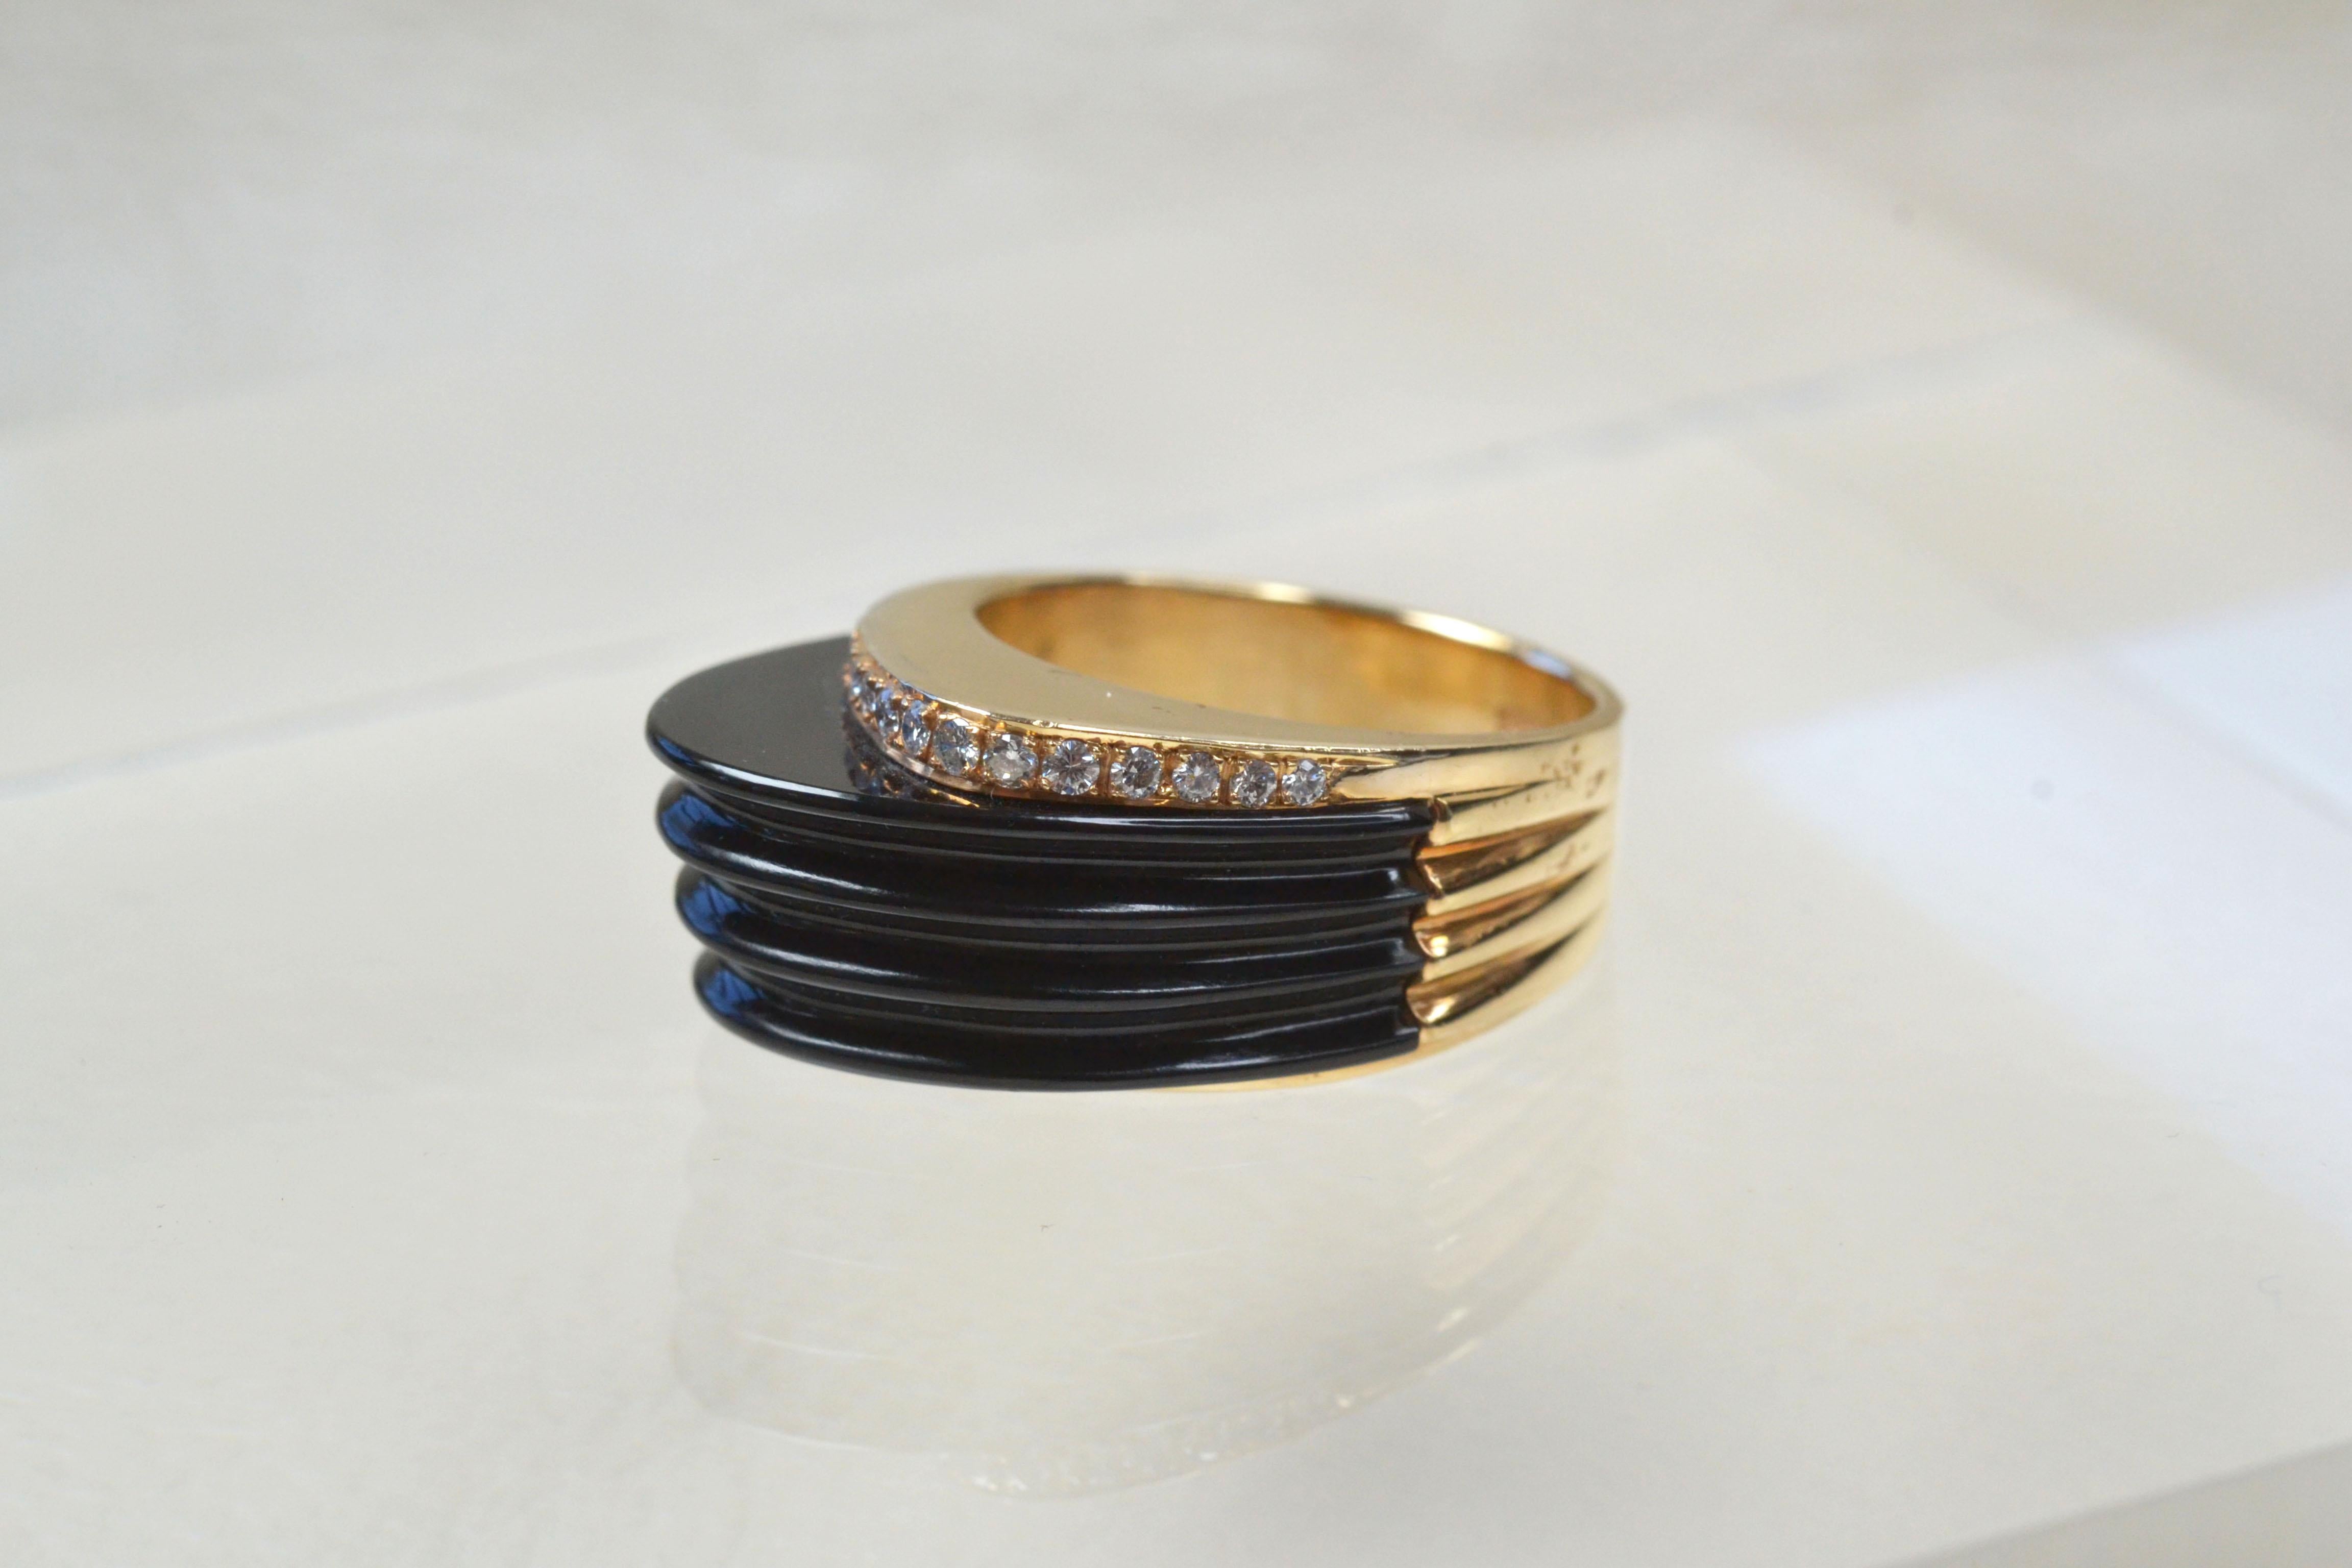 Vintage 14k Ridged Onyx Ring with Diamonds One-of-a-kind

This 14k gold ring from the 1980s makes for a wonderful statement piece. The jet black onyx and the diamond accents are dazzling yet wearable and this ring perfectly fits a size O!

Vintage